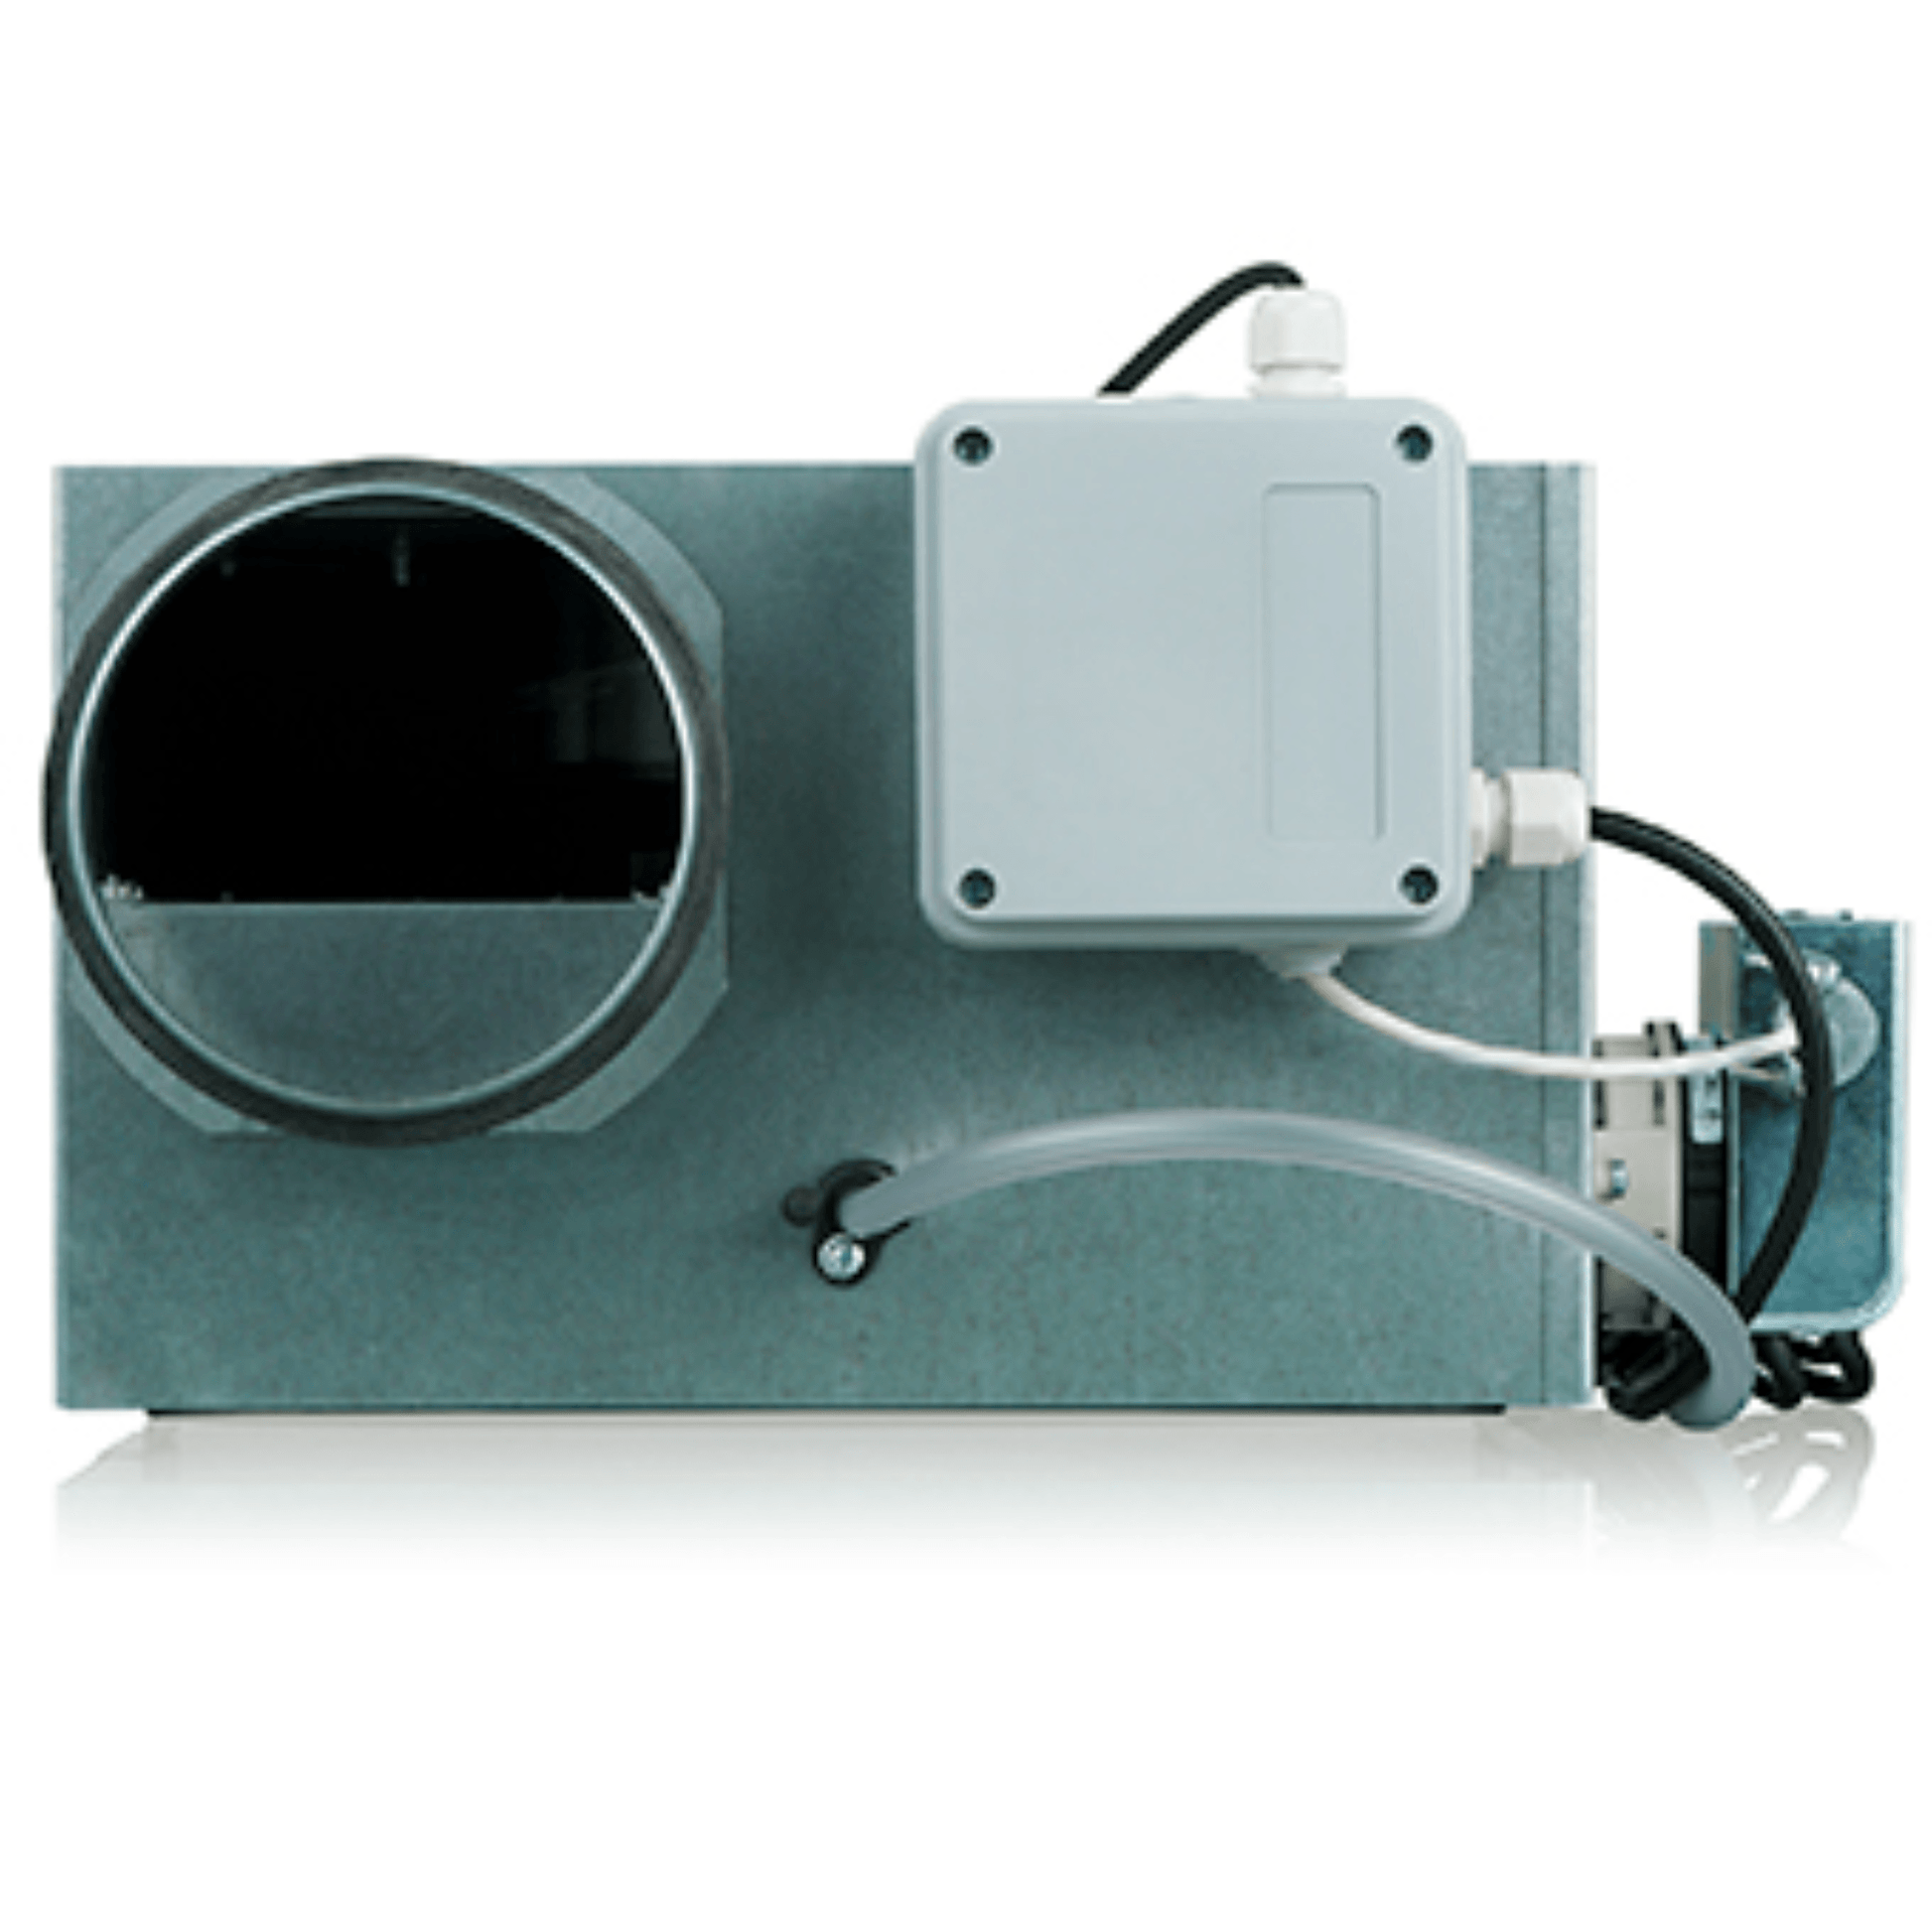 VENTS-US VK 125 PS Dryer Booster Fan for 5 inch duct work with pressure  senso